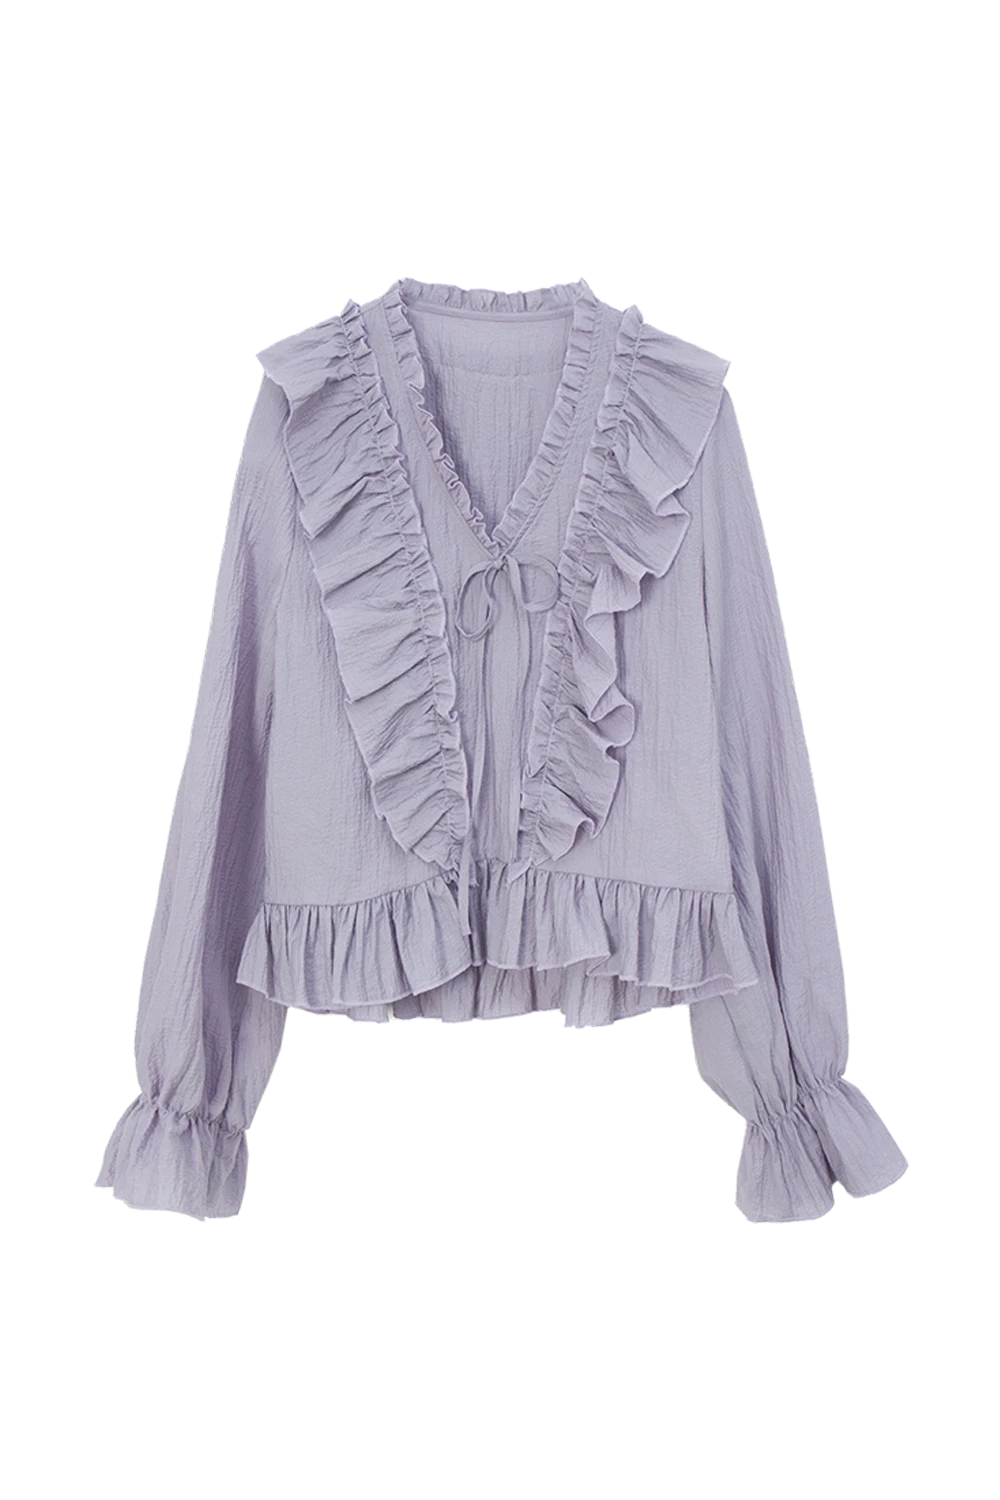 Romantic Ruffle-Trimmed V-Neck Blouse with Tie Detail and Balloon Sleeves